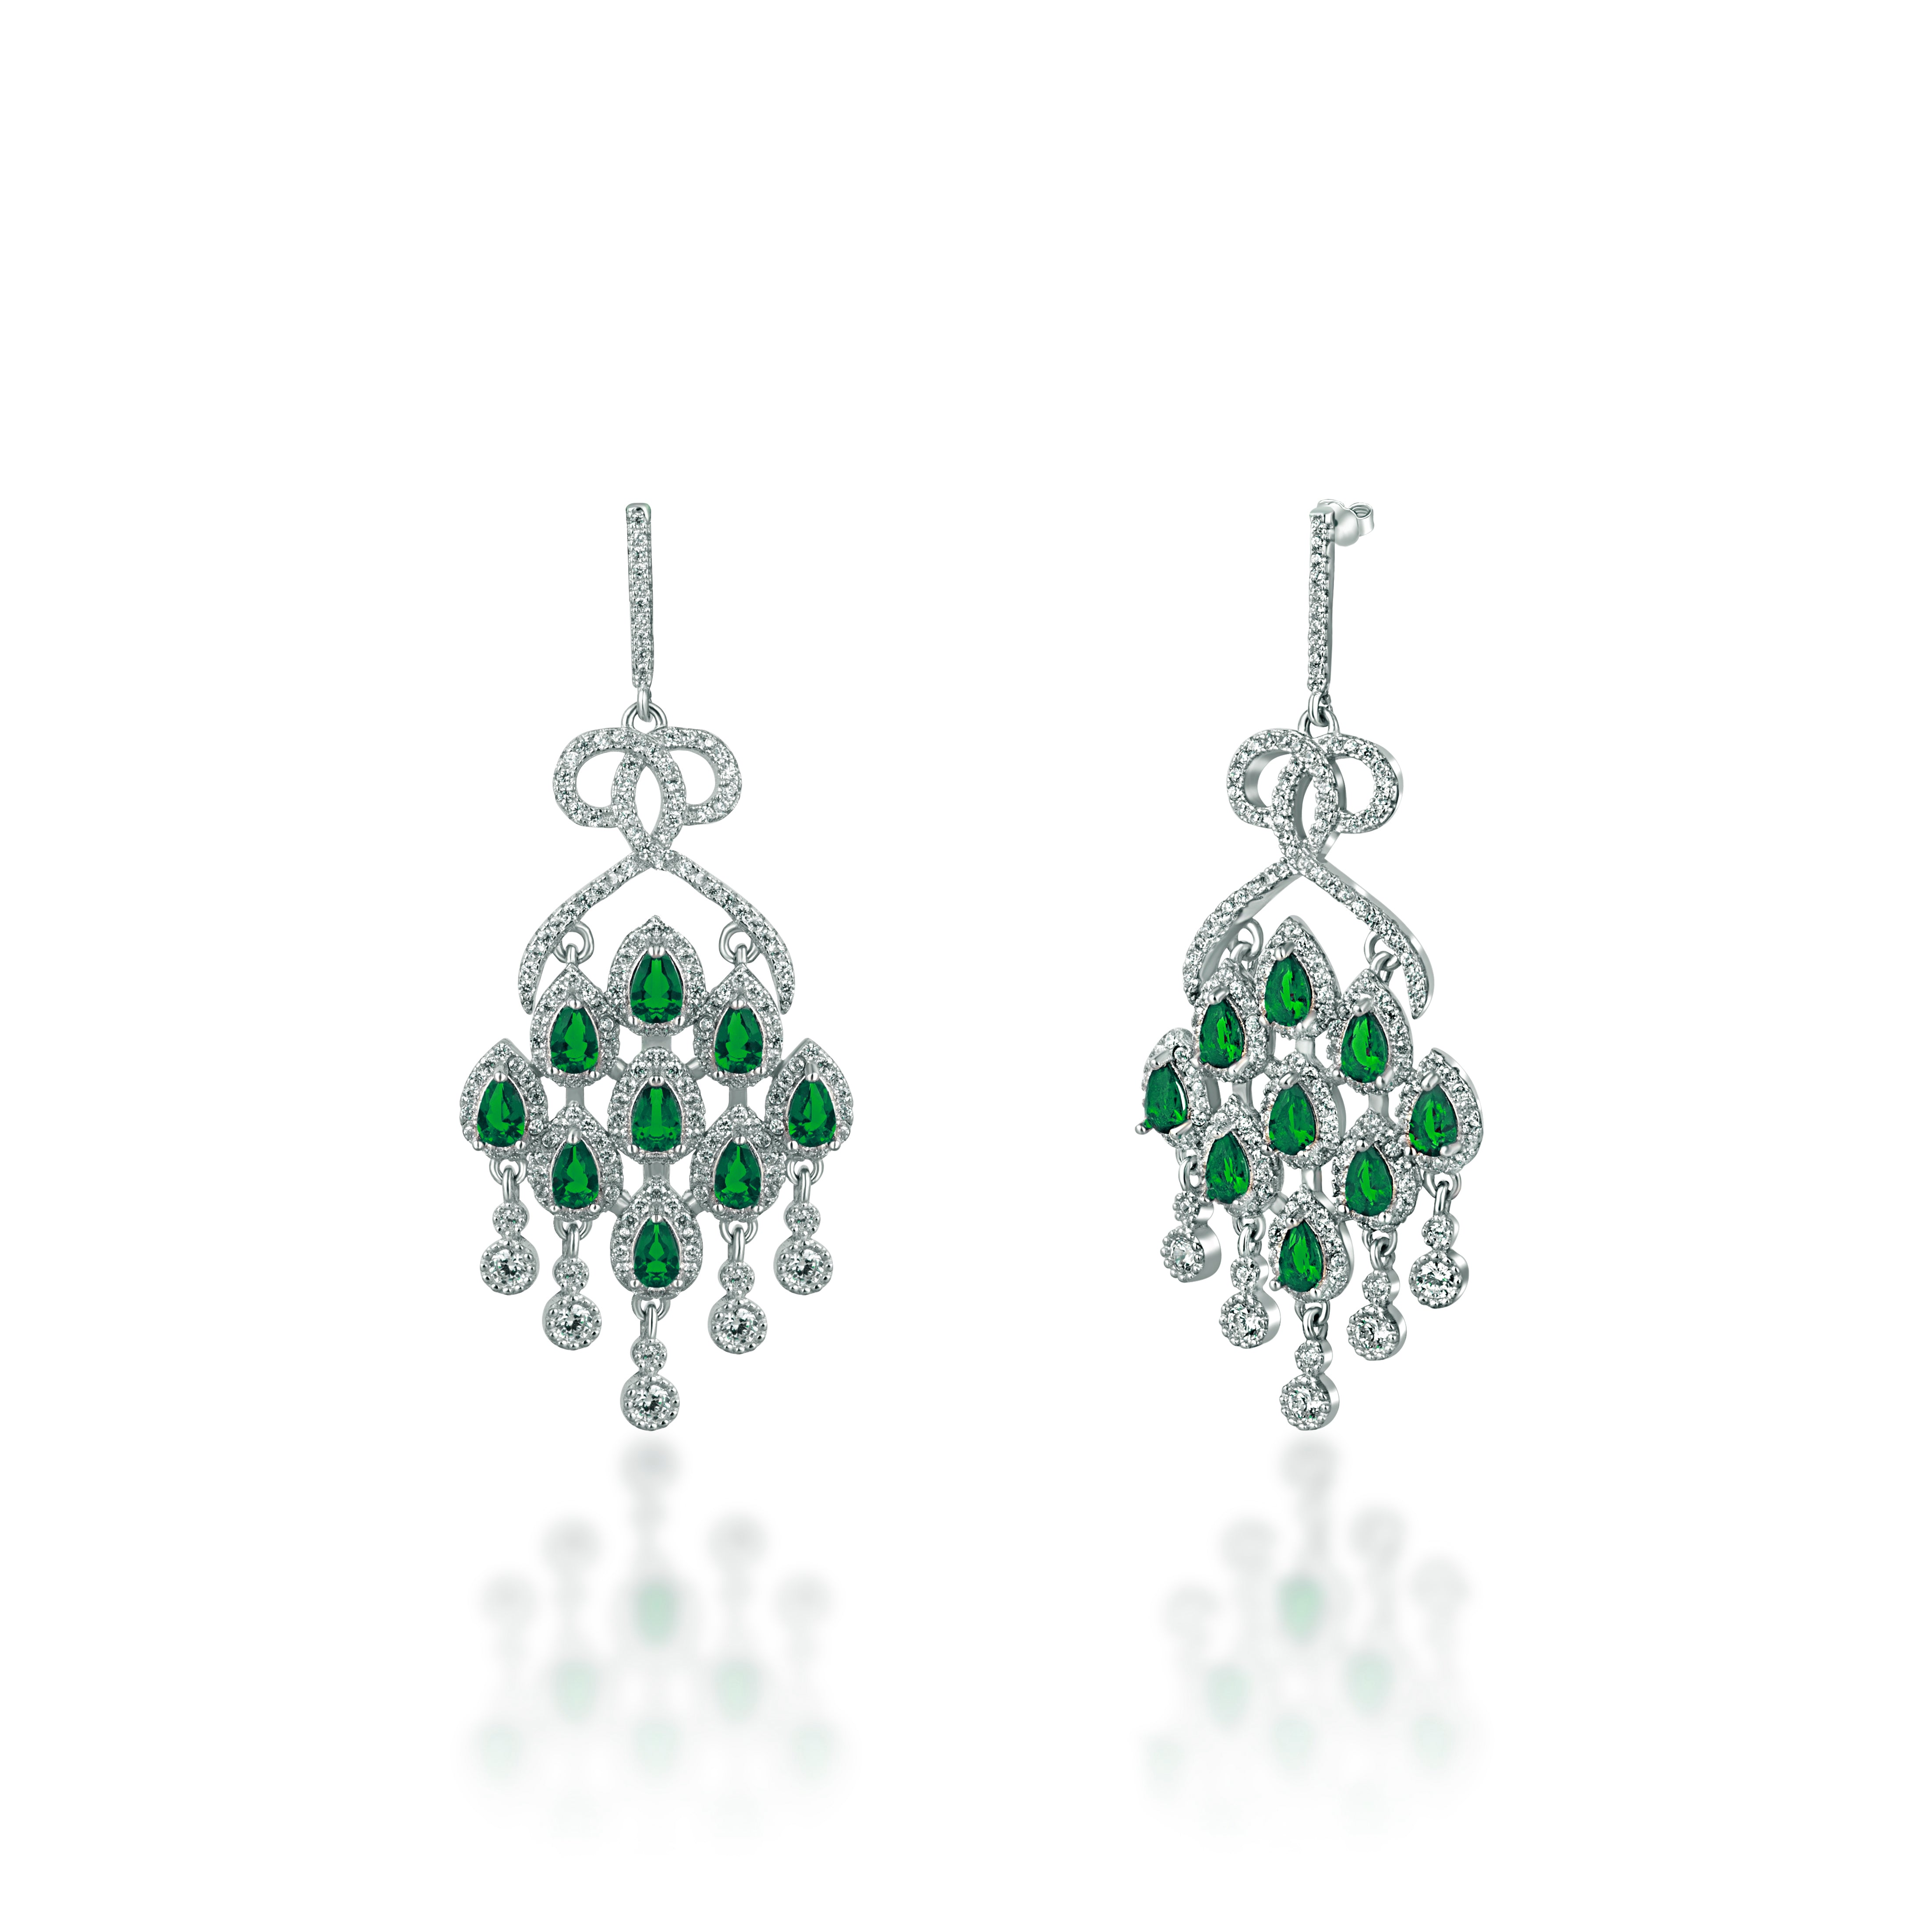 92.5 sterling silver danglers earring from cocktail range are studded with zirconias and green color drop shape stone